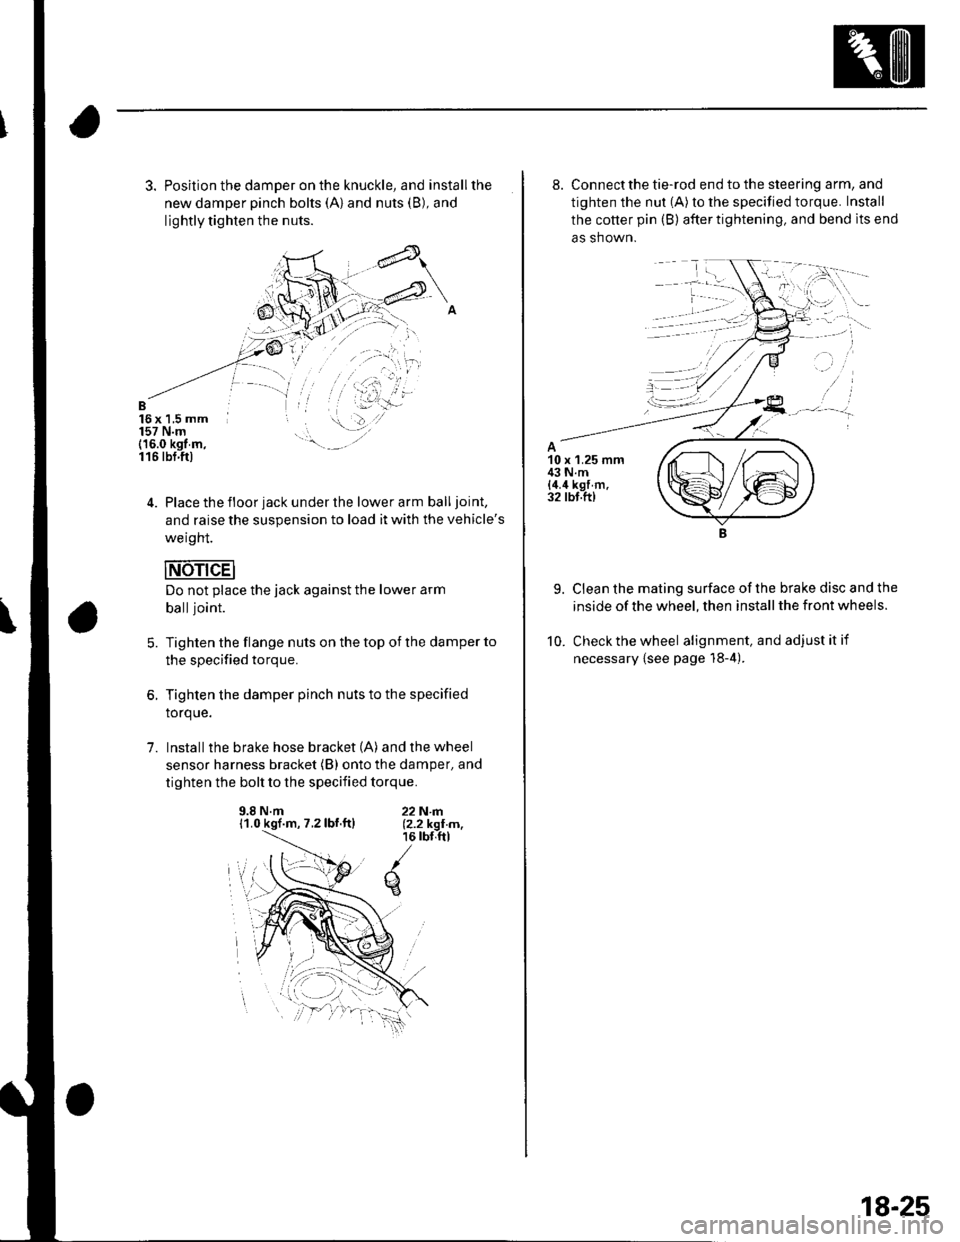 HONDA CIVIC 2002 7.G Workshop Manual 3. Position the damper on the knuckle, and installthe
new damper pinch bolts (A) and nuts (B), and
lightly tighten the nuts.
B16x 1,5 mm157 N.m(16.0 kgt m,116 tbt.ftl
4. Place the floor jack under the